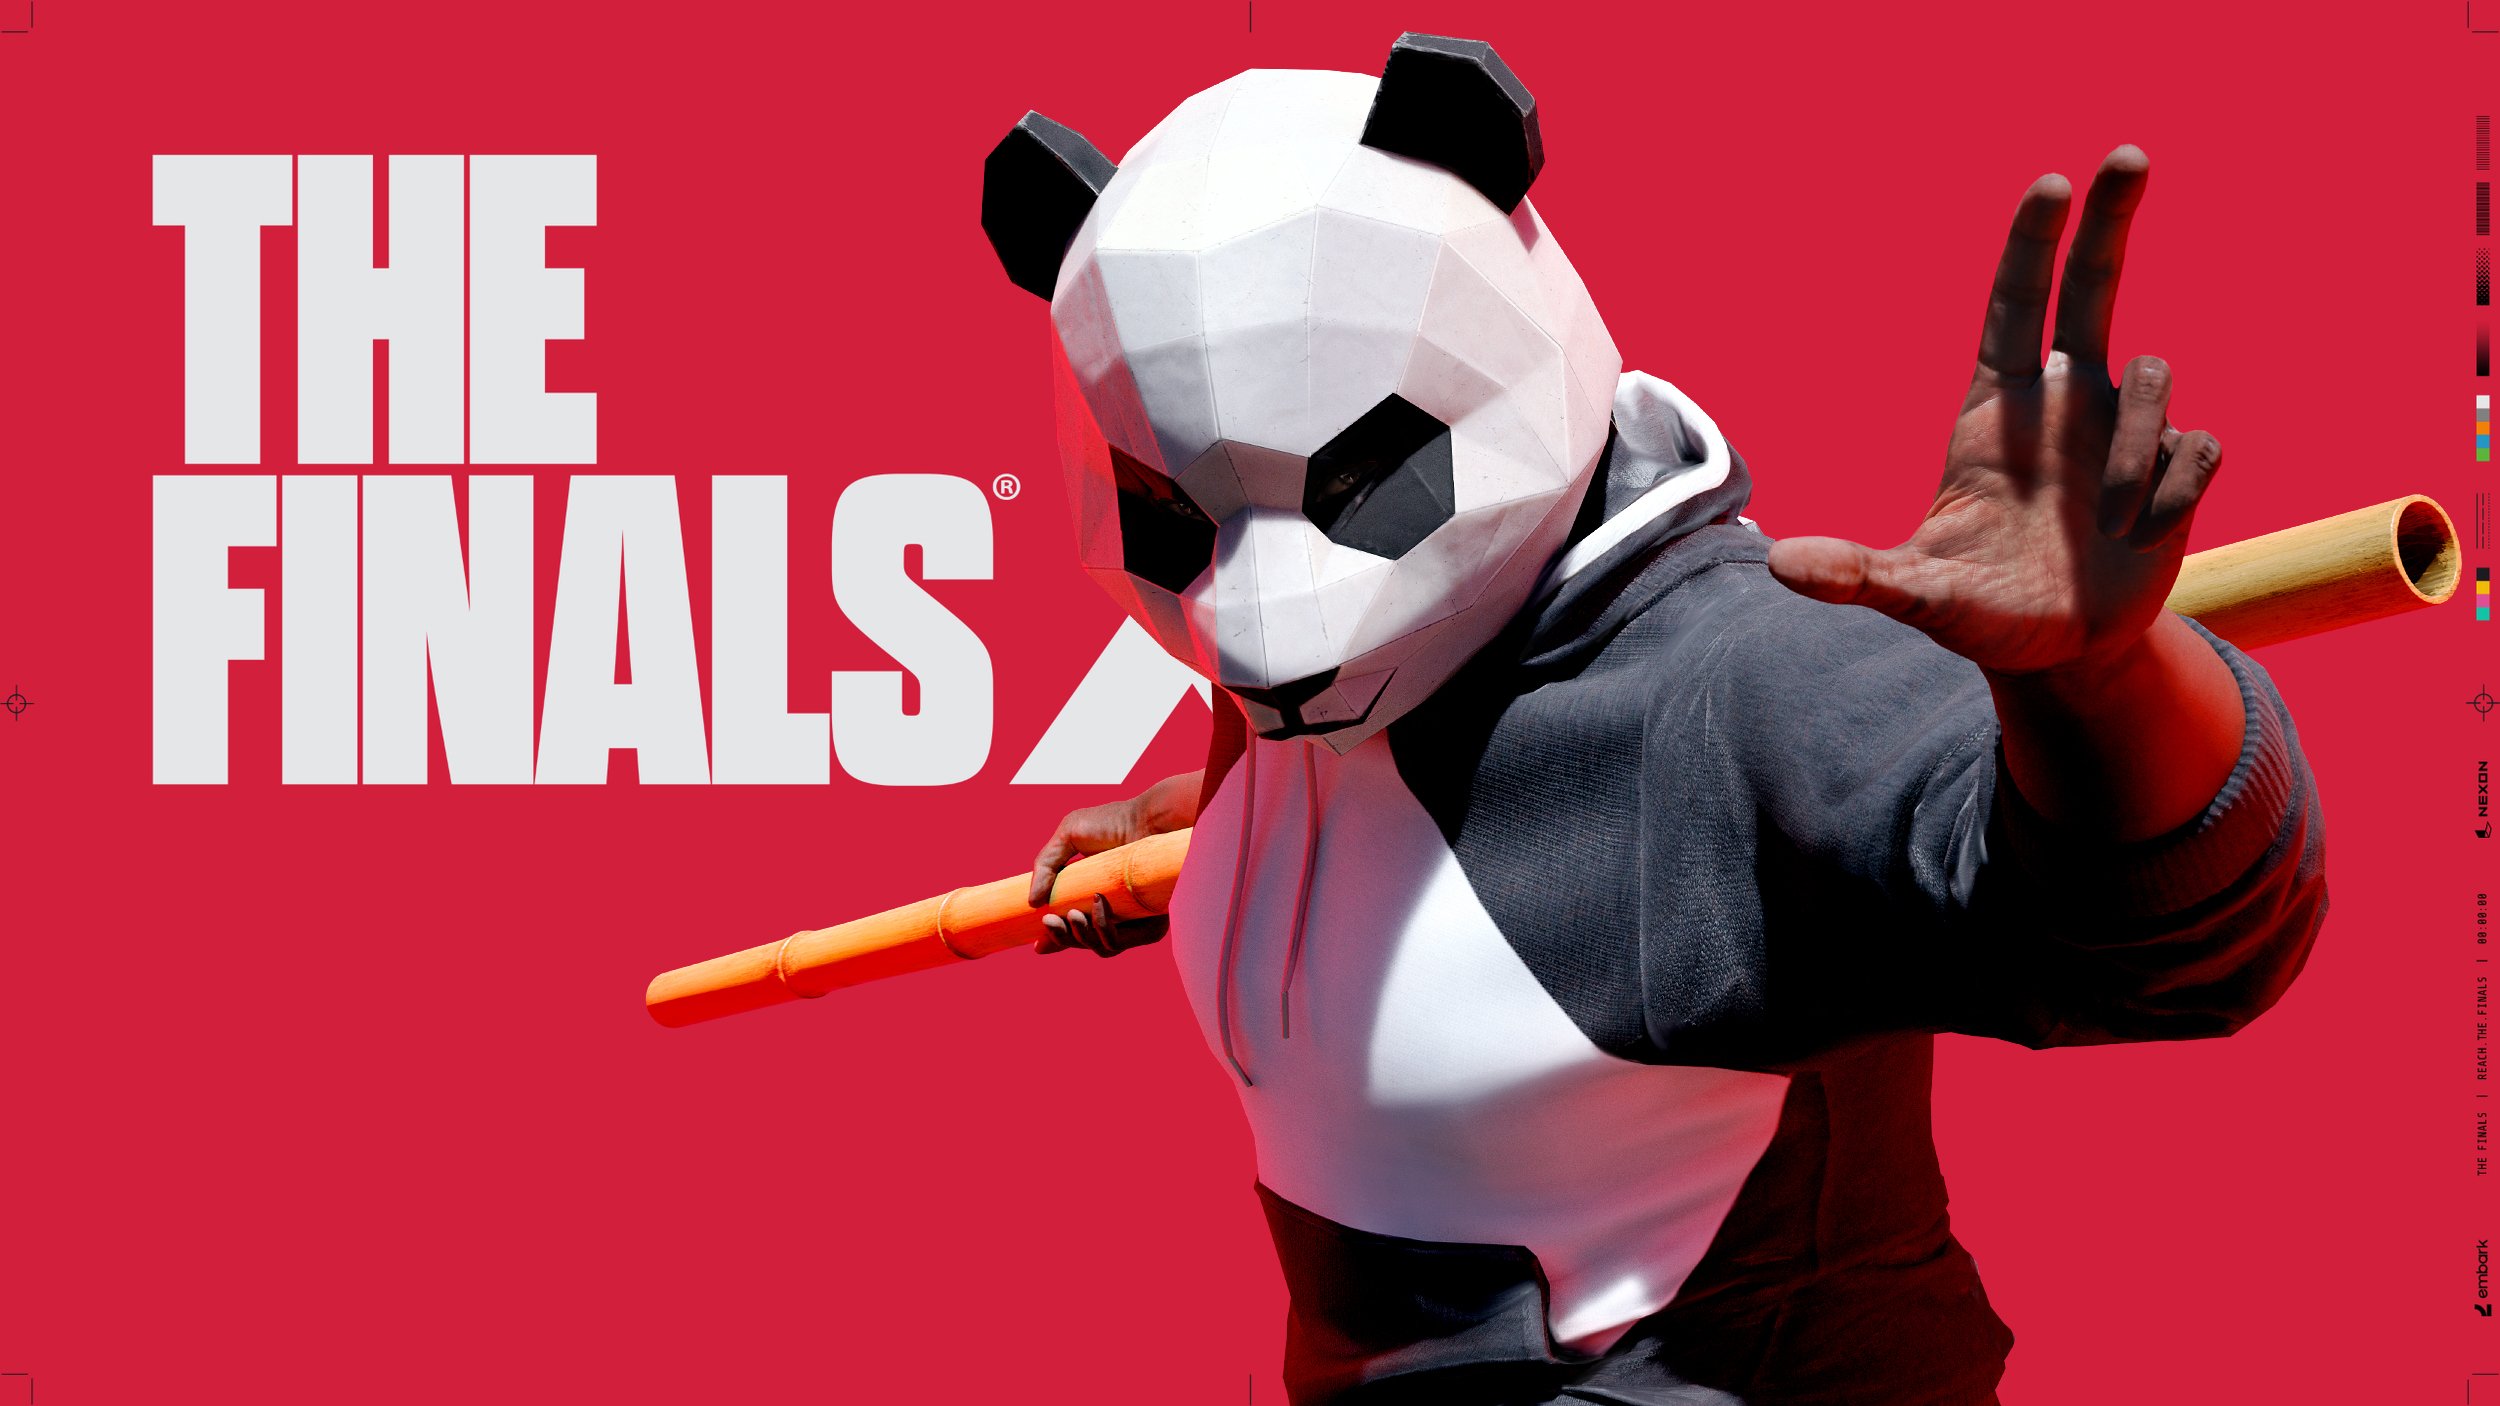 A person wearing a panda mask and a sweatshirt stands against a red background in key art for The Finals.